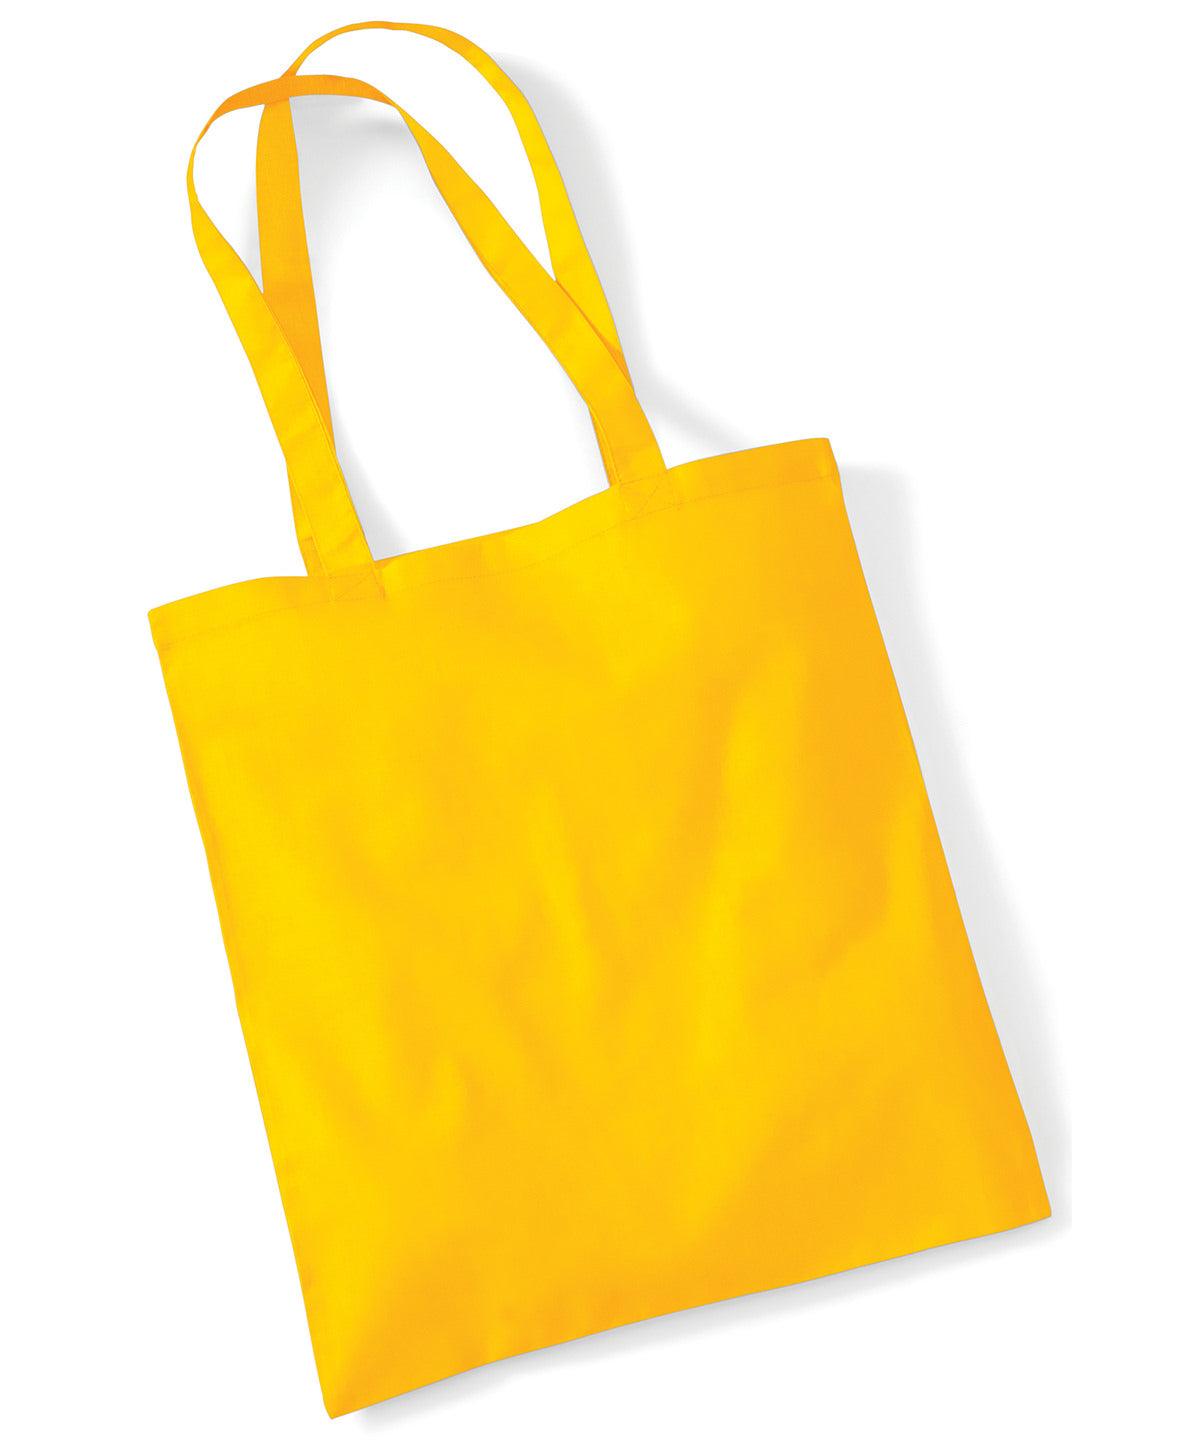 Sunflower - Bag for life - long handles Bags Westford Mill Bags & Luggage, Crafting, Must Haves, Rebrandable Schoolwear Centres